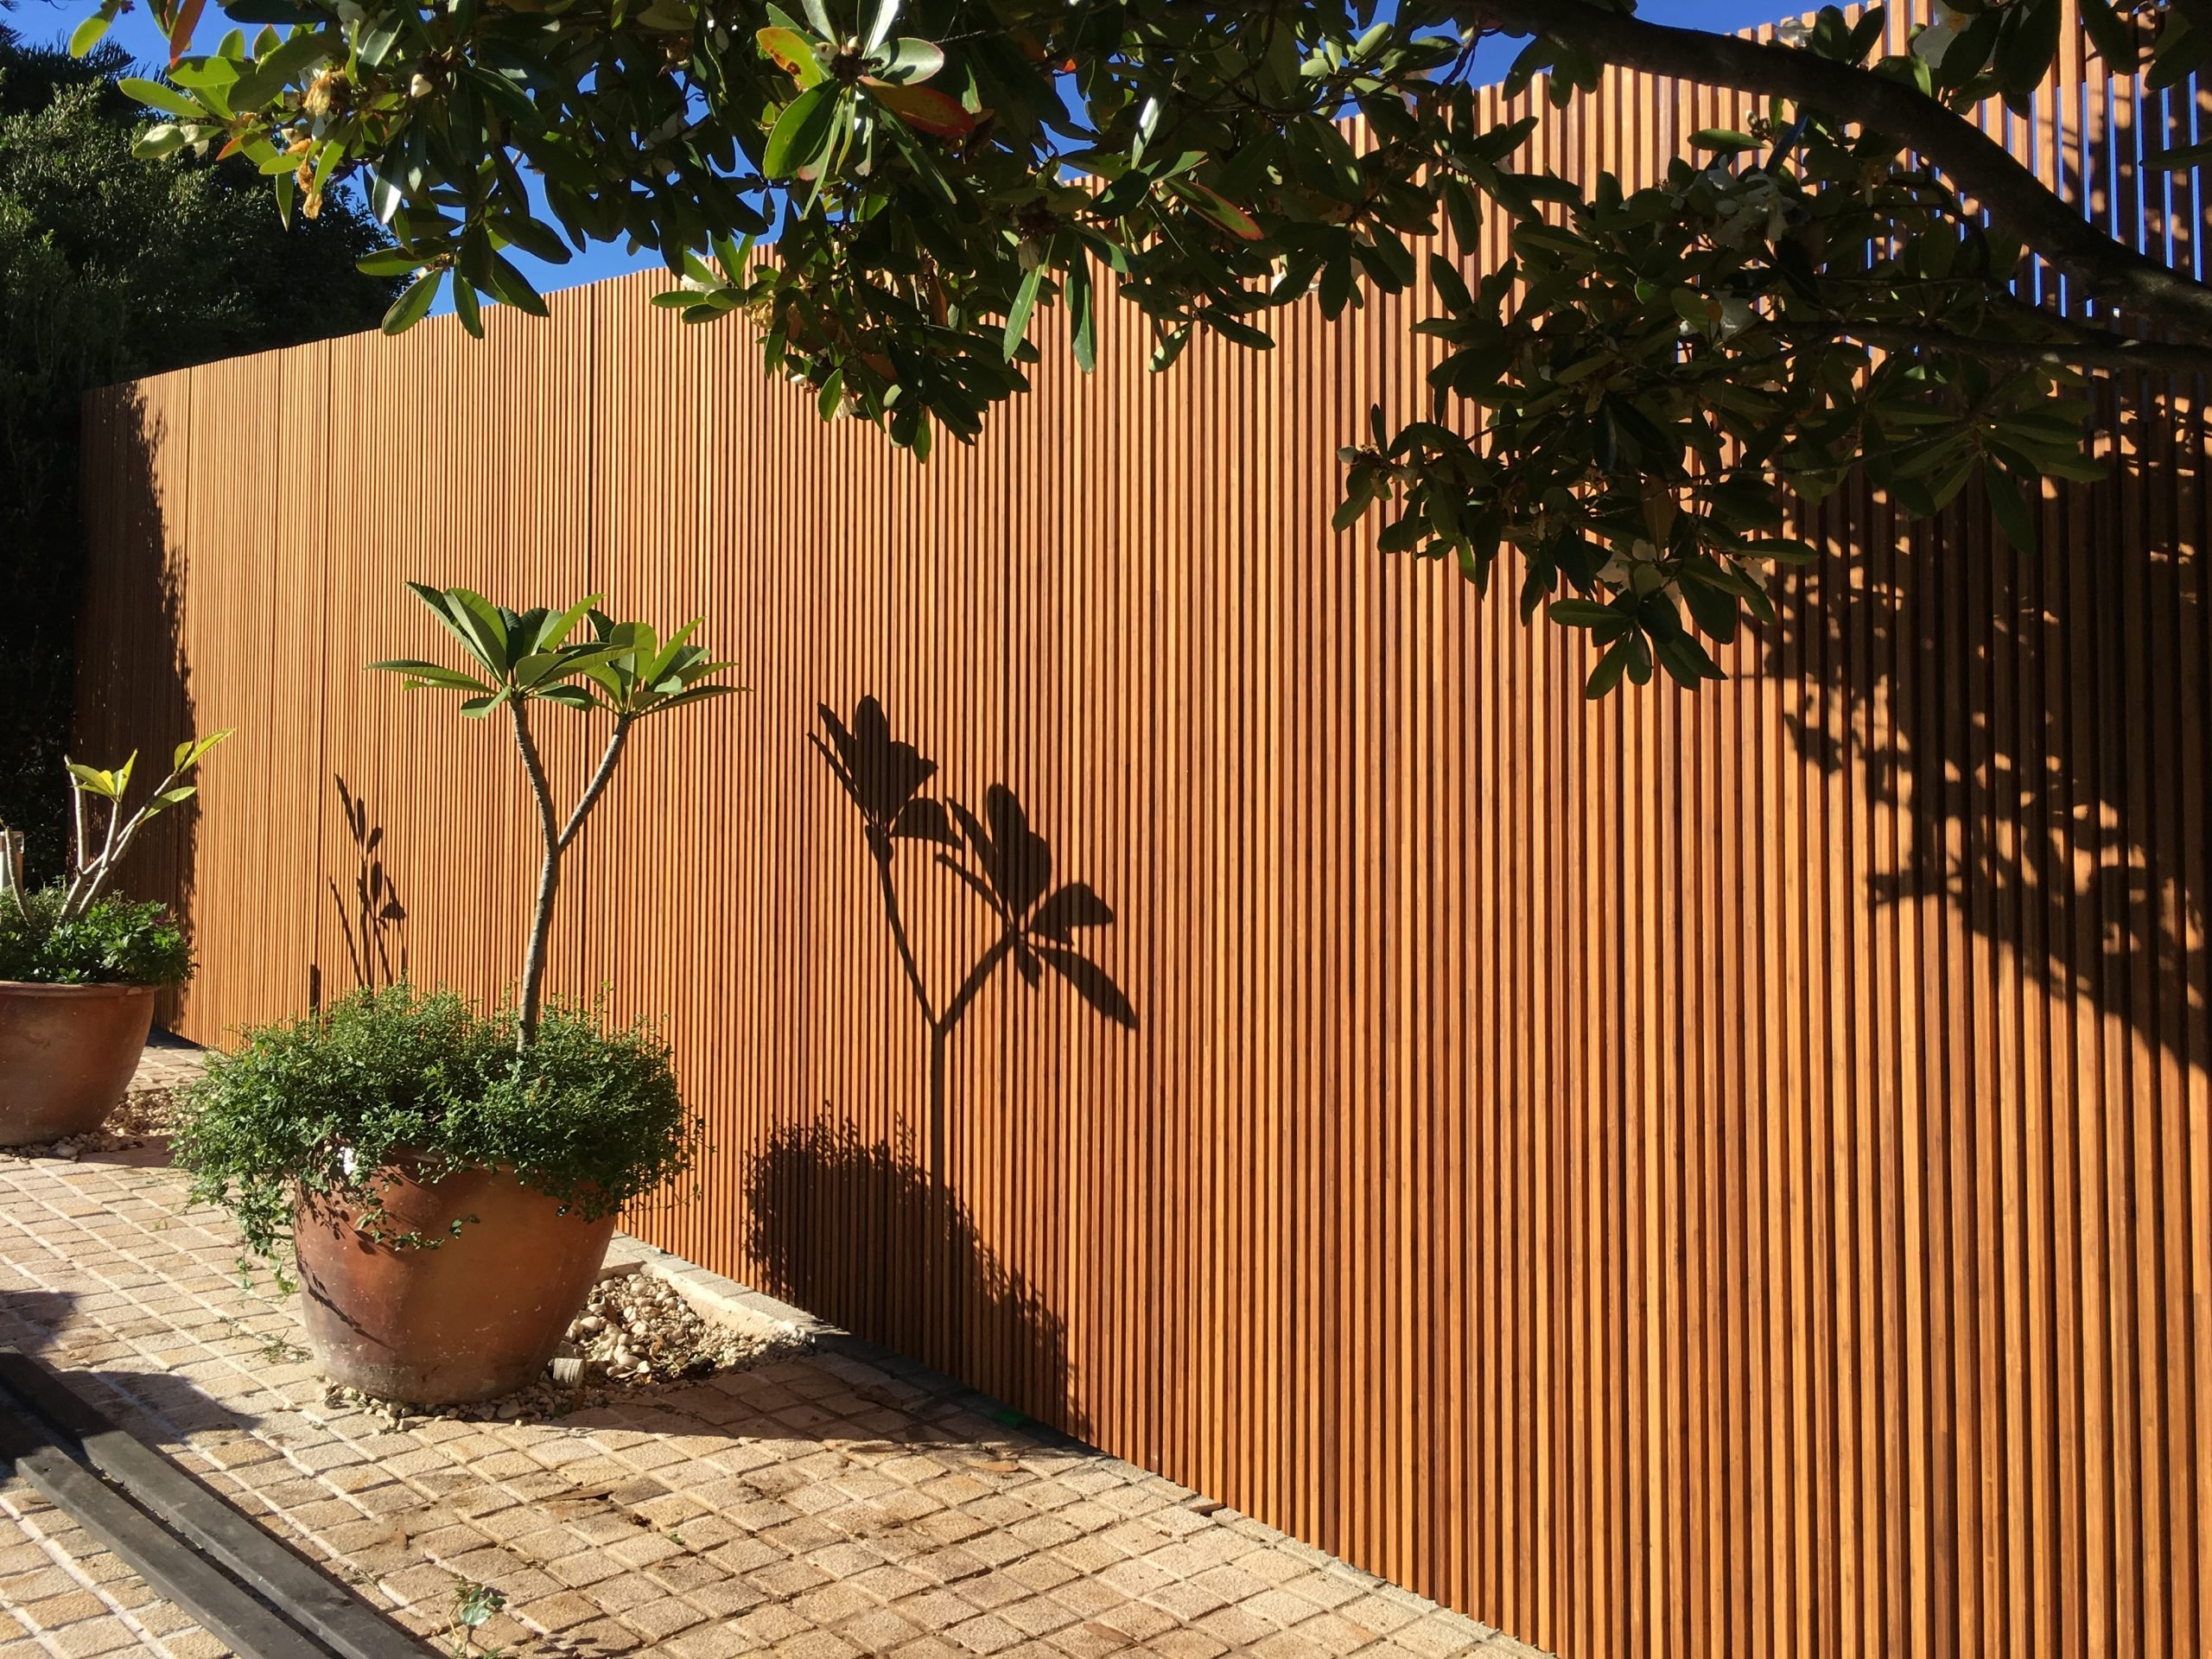 Slatted Bamboo Fence in Courtyard